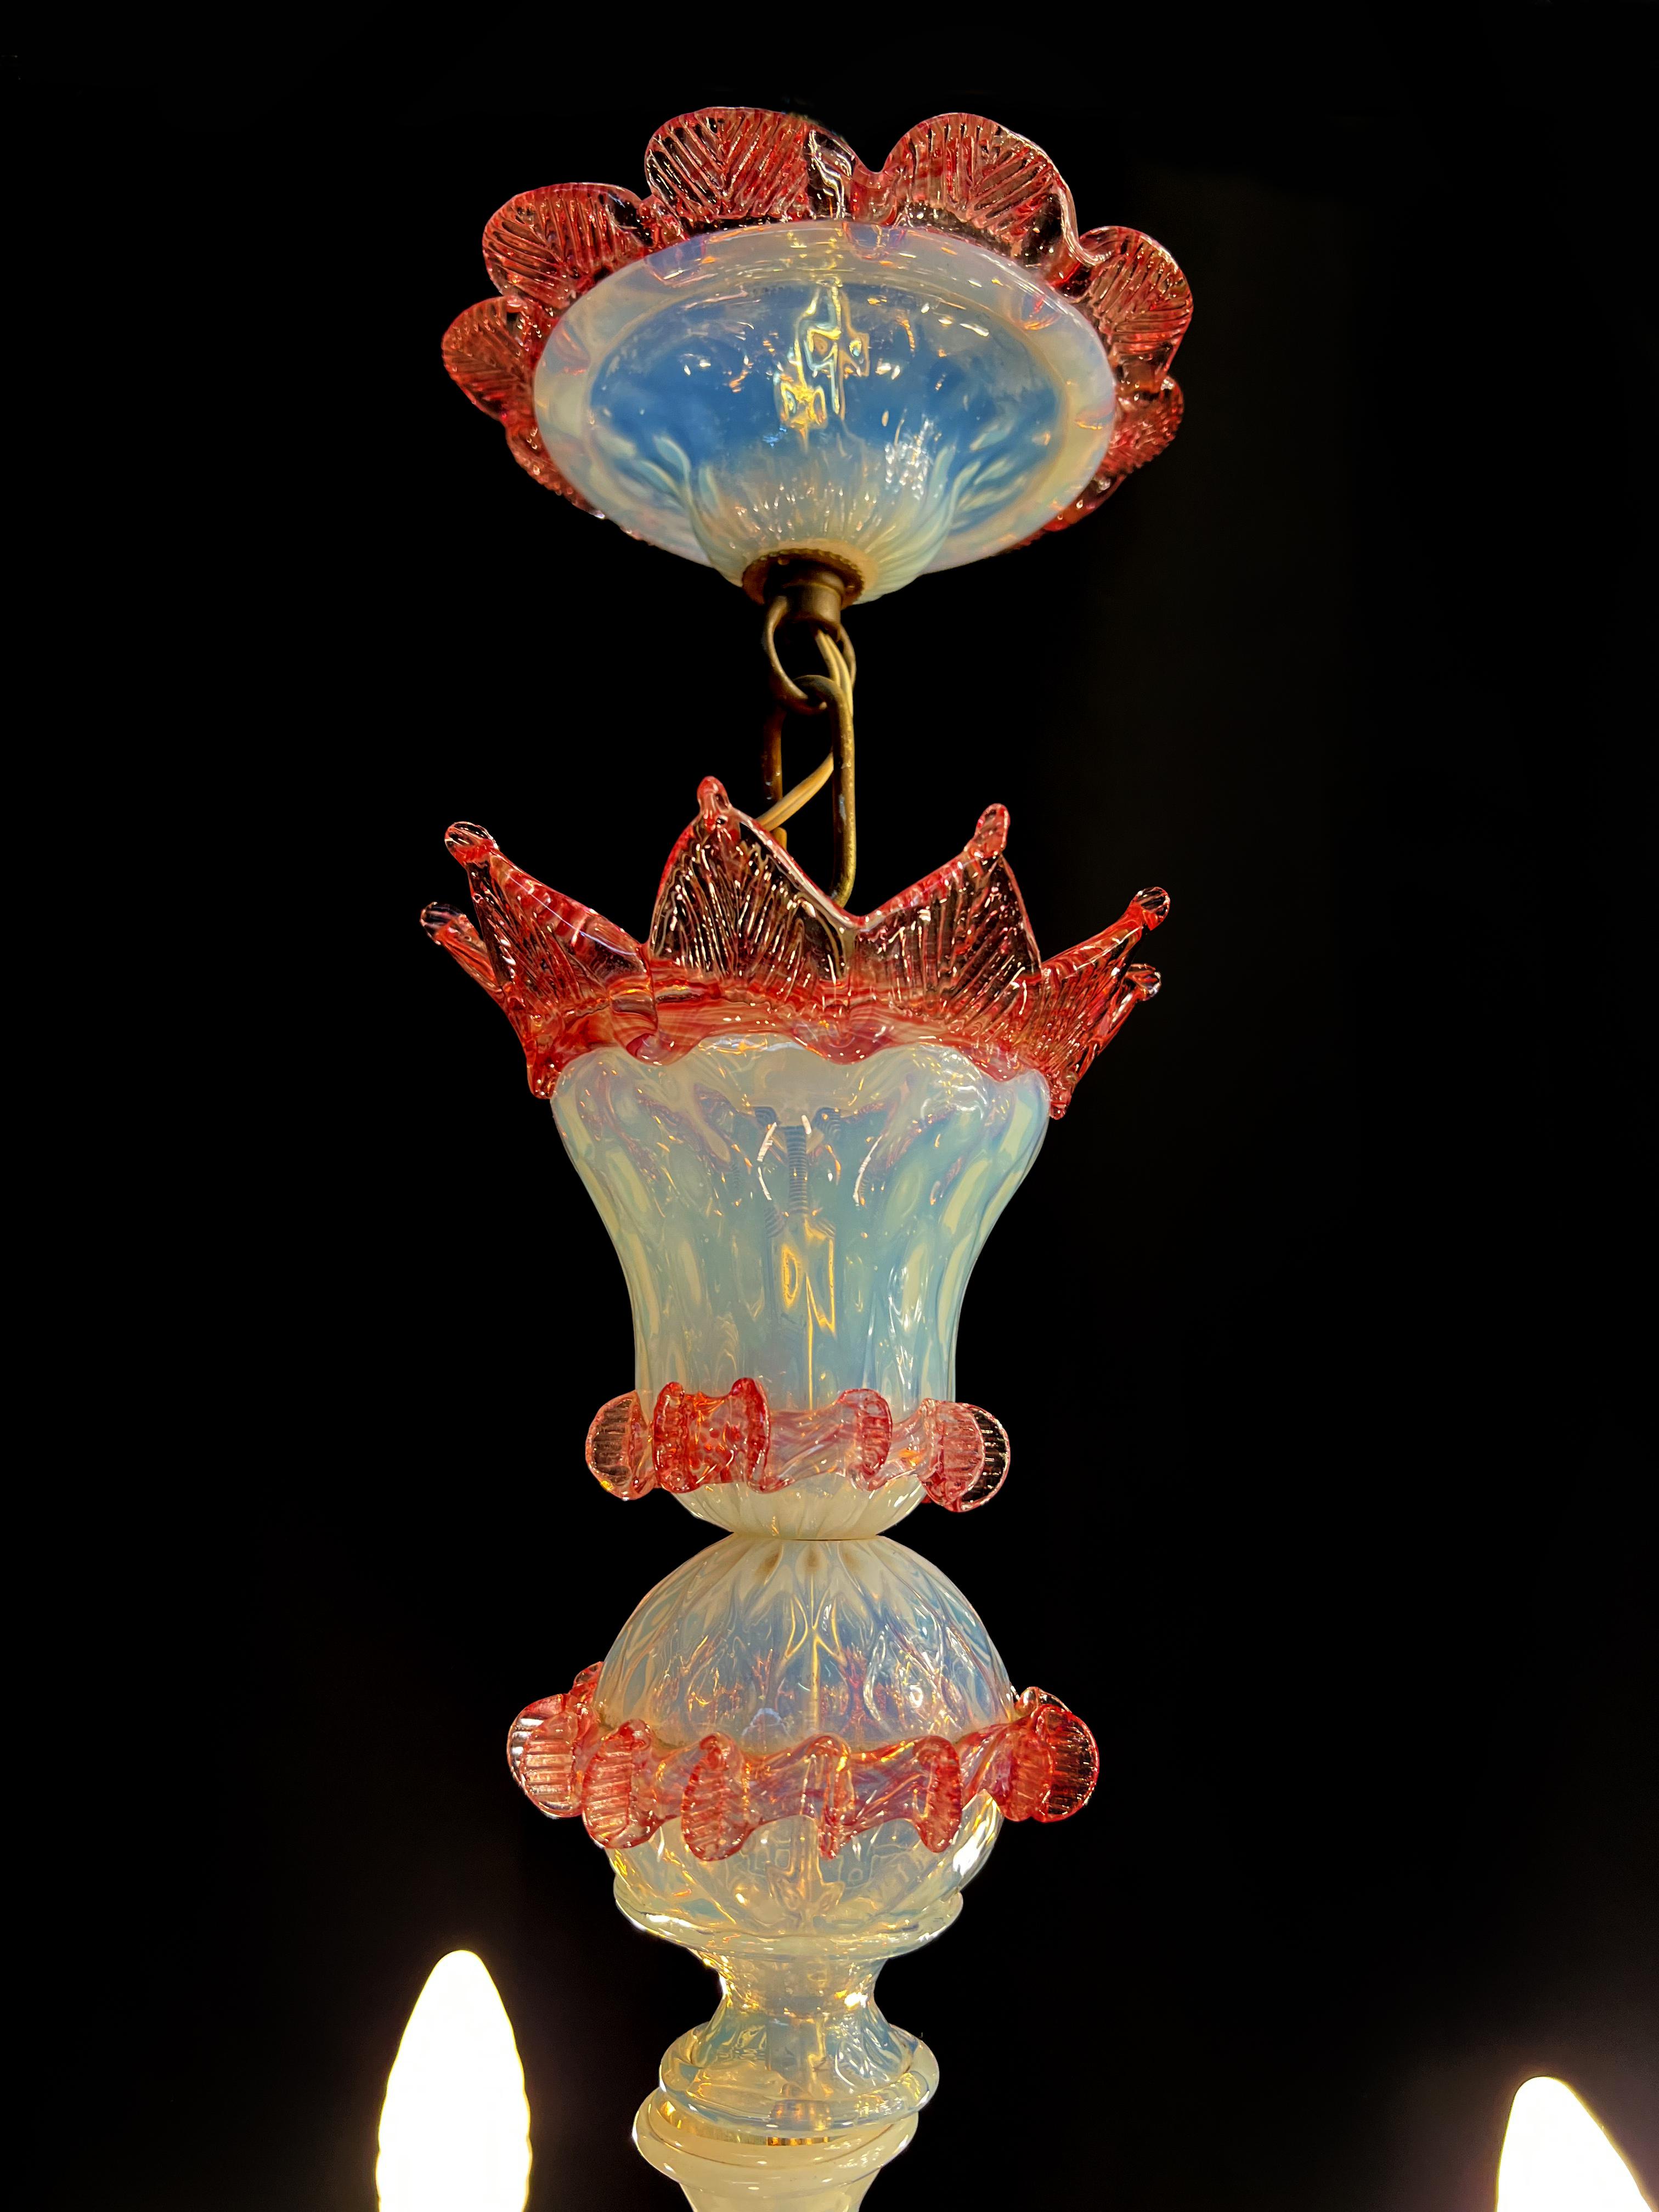 Stunning Trio Light Blue and Pink Venetian Chandeliers, Murano, 1950s For Sale 2